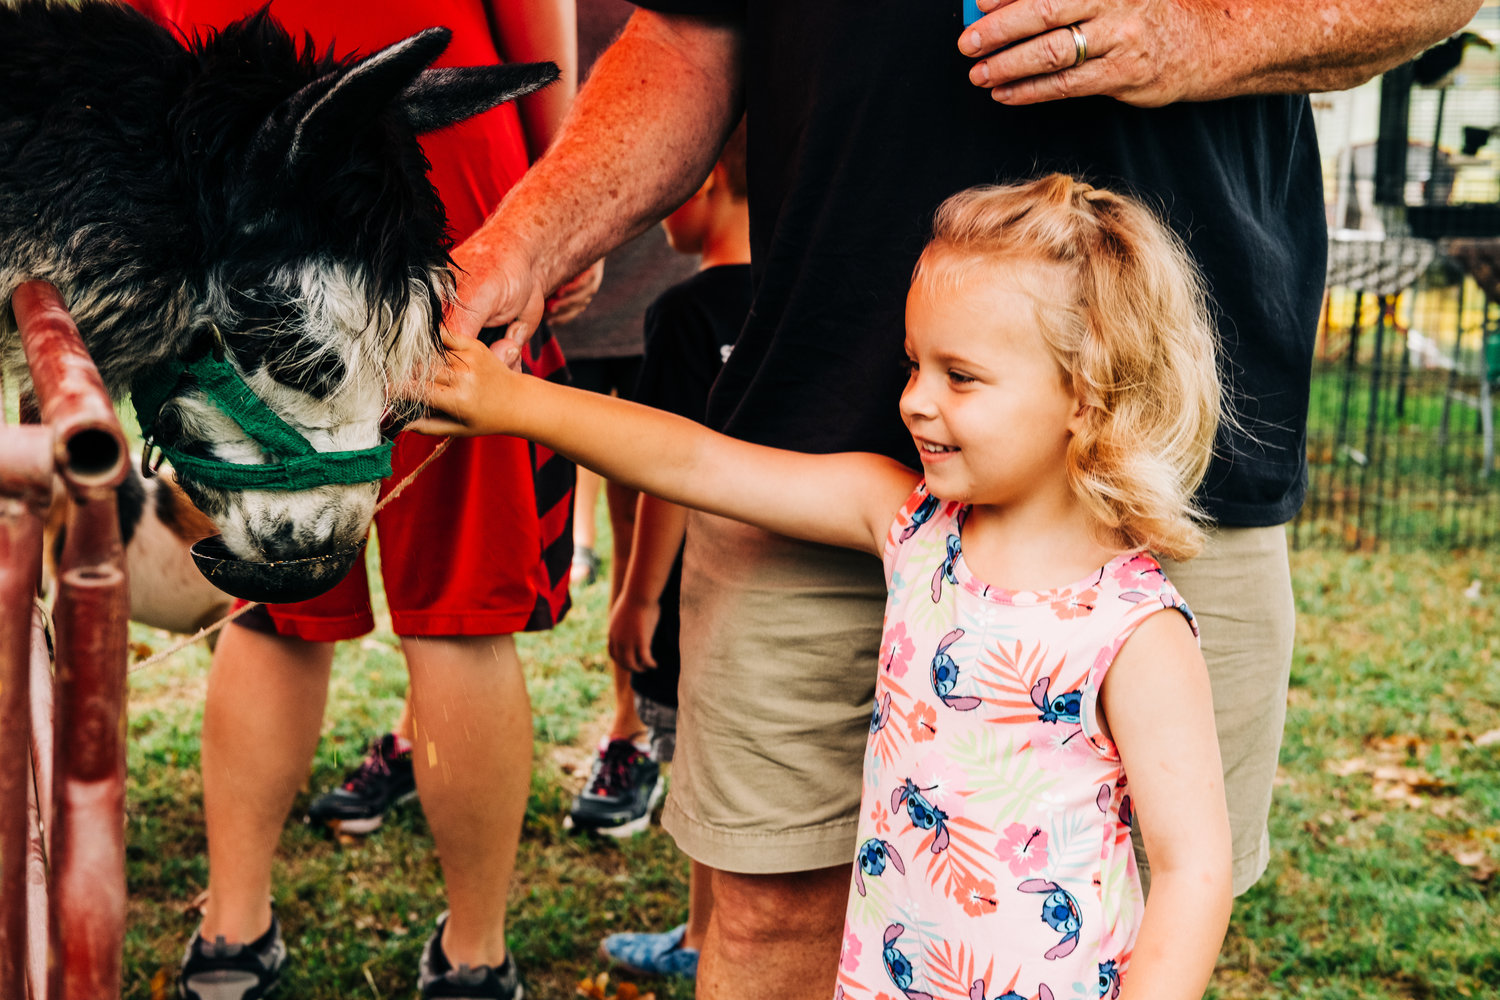 Evie Pyle, 4, feeds a petting zoo alpaca at Lincoln Park during the Little Balkans Days Celebration on Saturday.